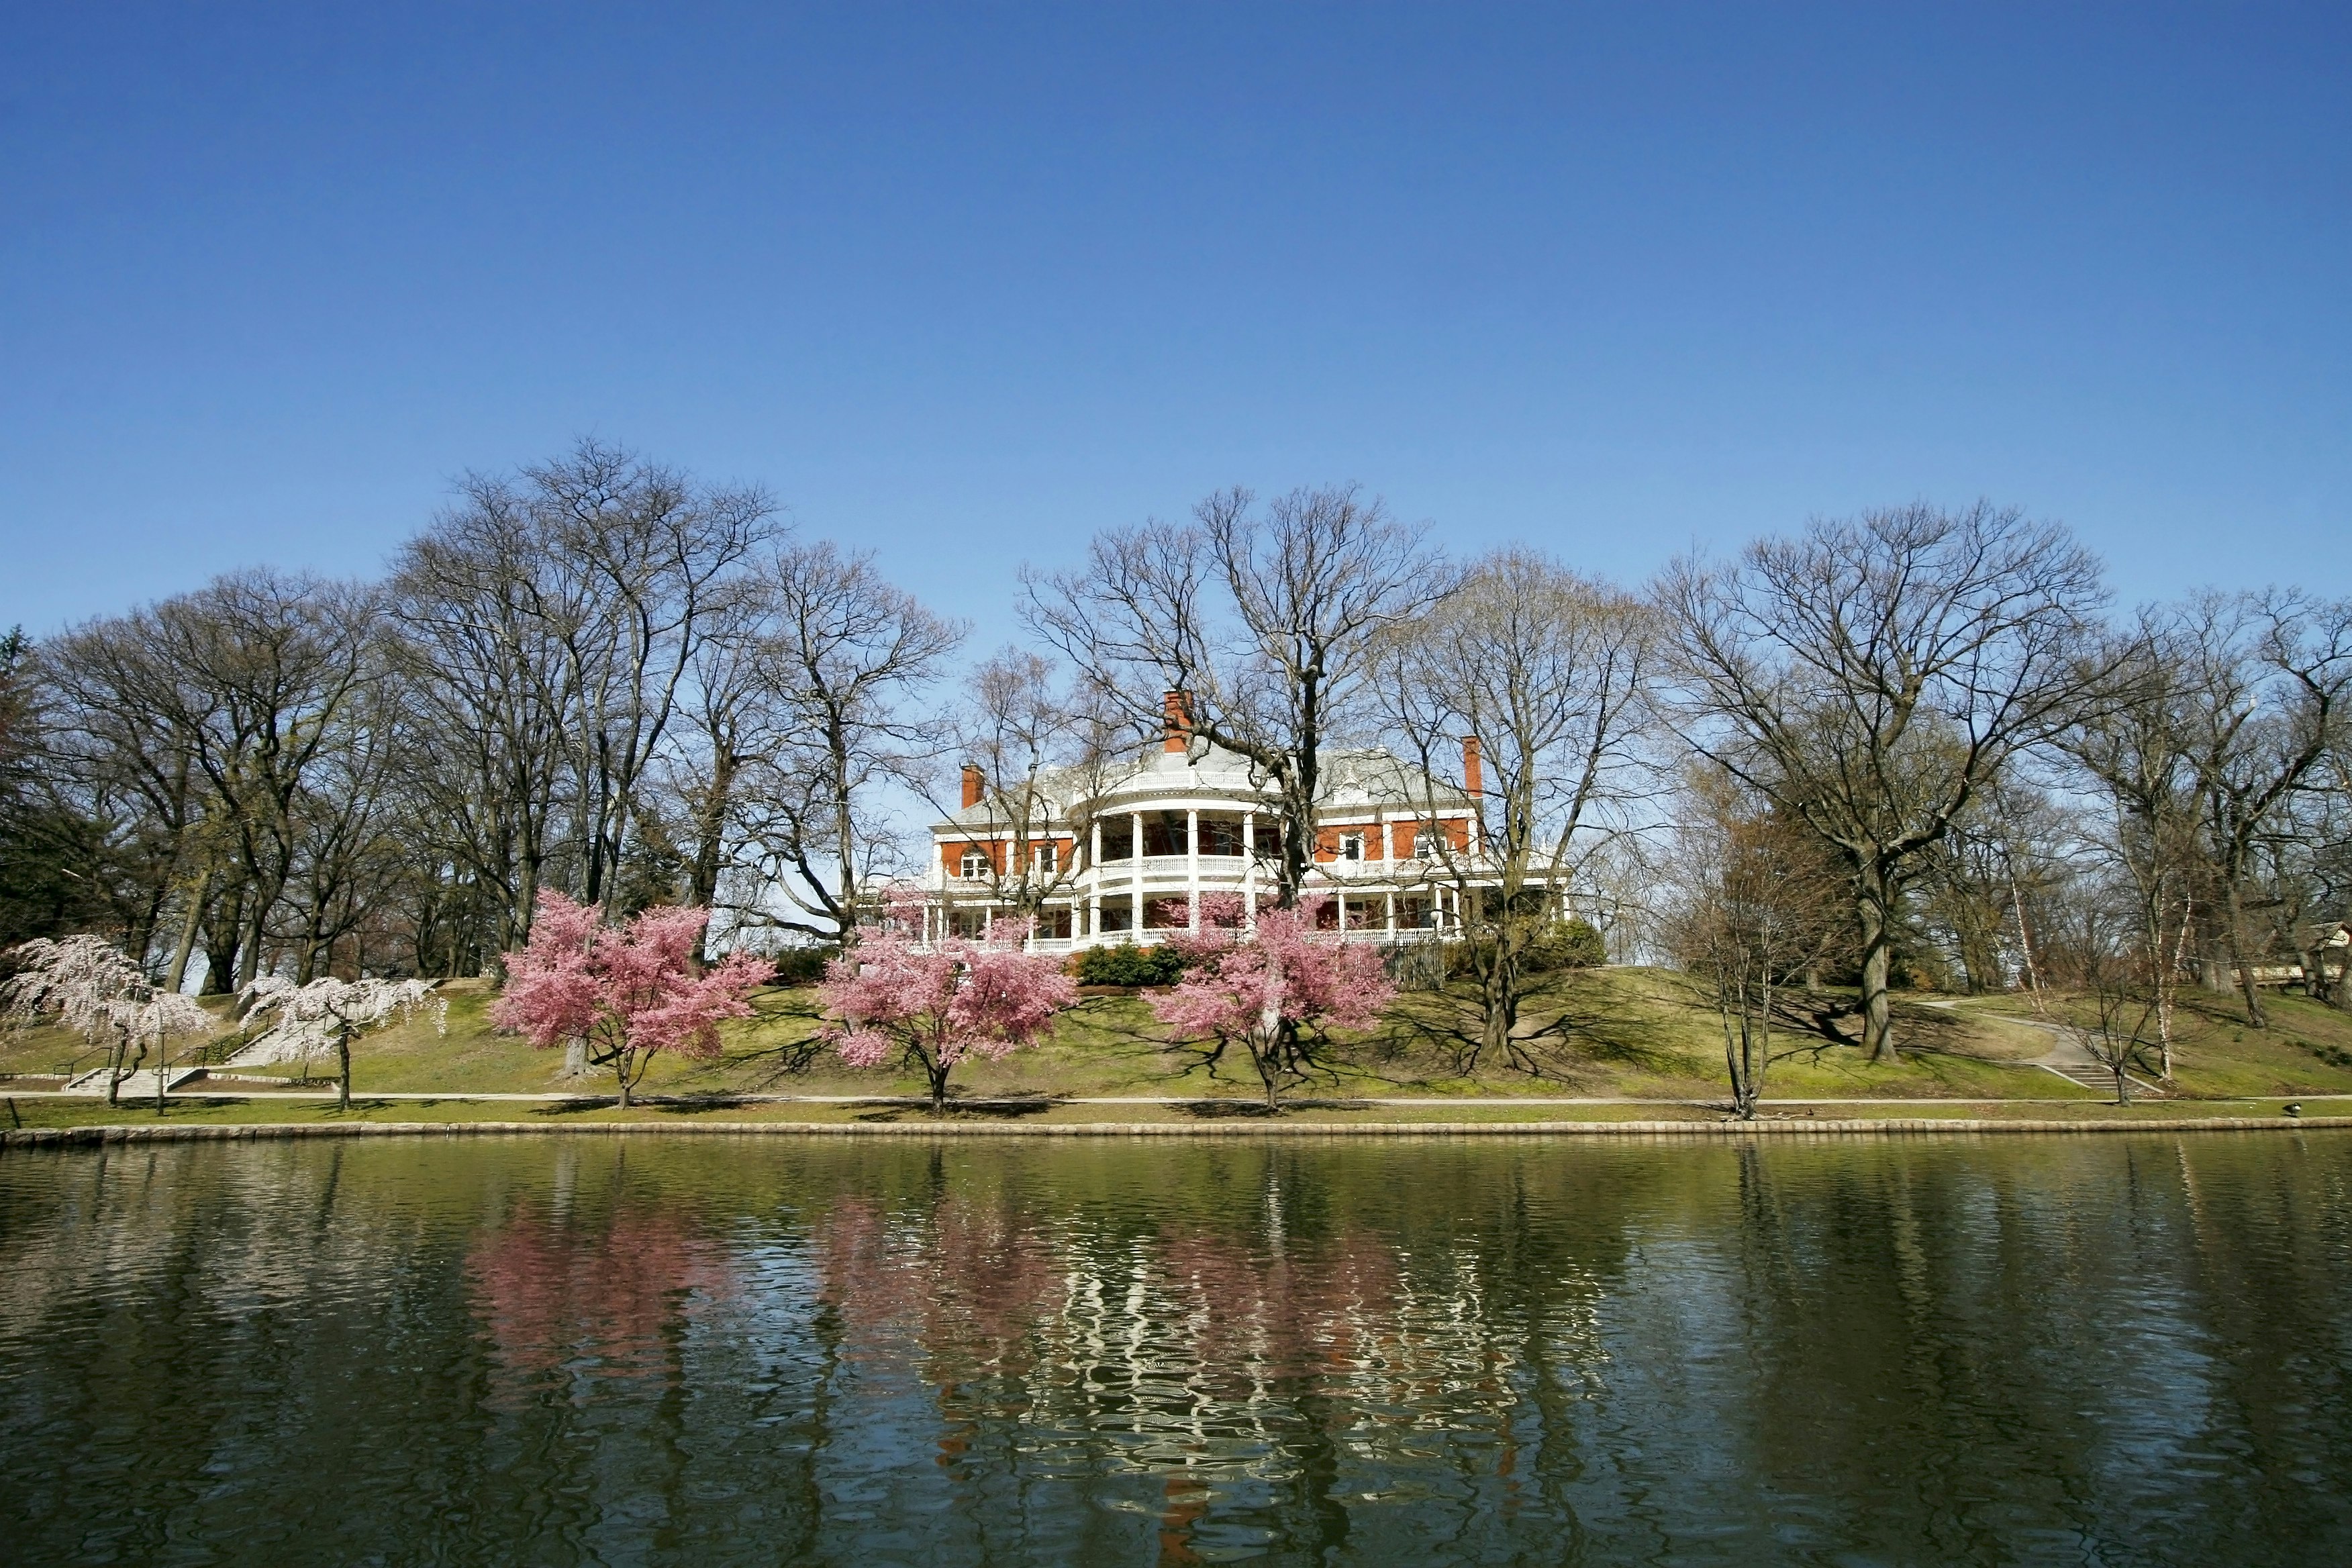 beautiful landscape with Casino in Roger Williams Park, Providence, Rhode Island; Shutterstock ID 11691217; Your name (First / Last): Lauren Keith; GL account no.: 65050; Netsuite department name: Content Asset; Full Product or Project name including edition: Guides Project Eastern USA